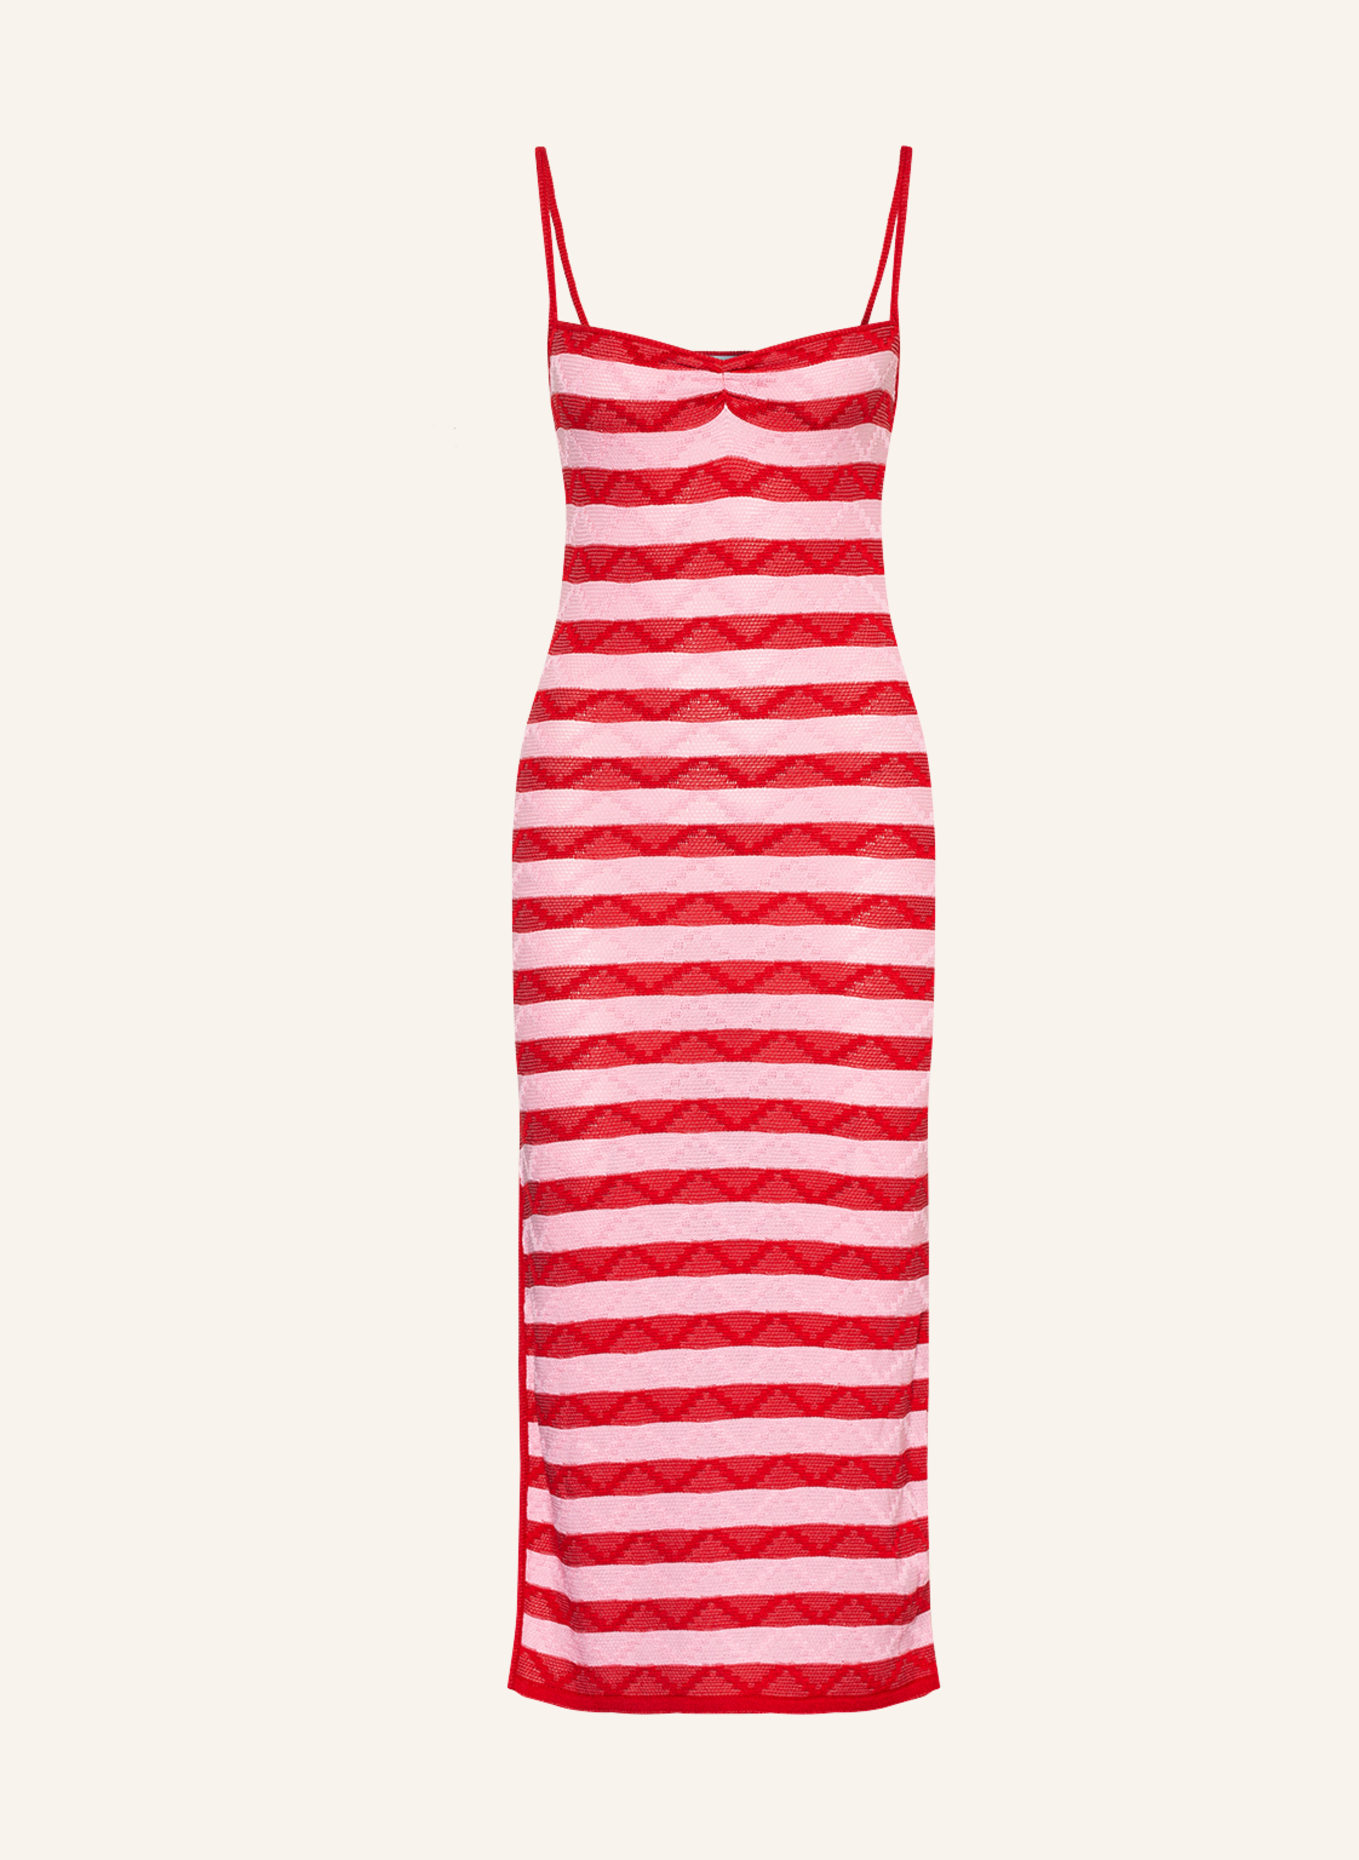 MUSIER PARIS Knit dress HYDRA, Color: RED/ PINK (Image 1)